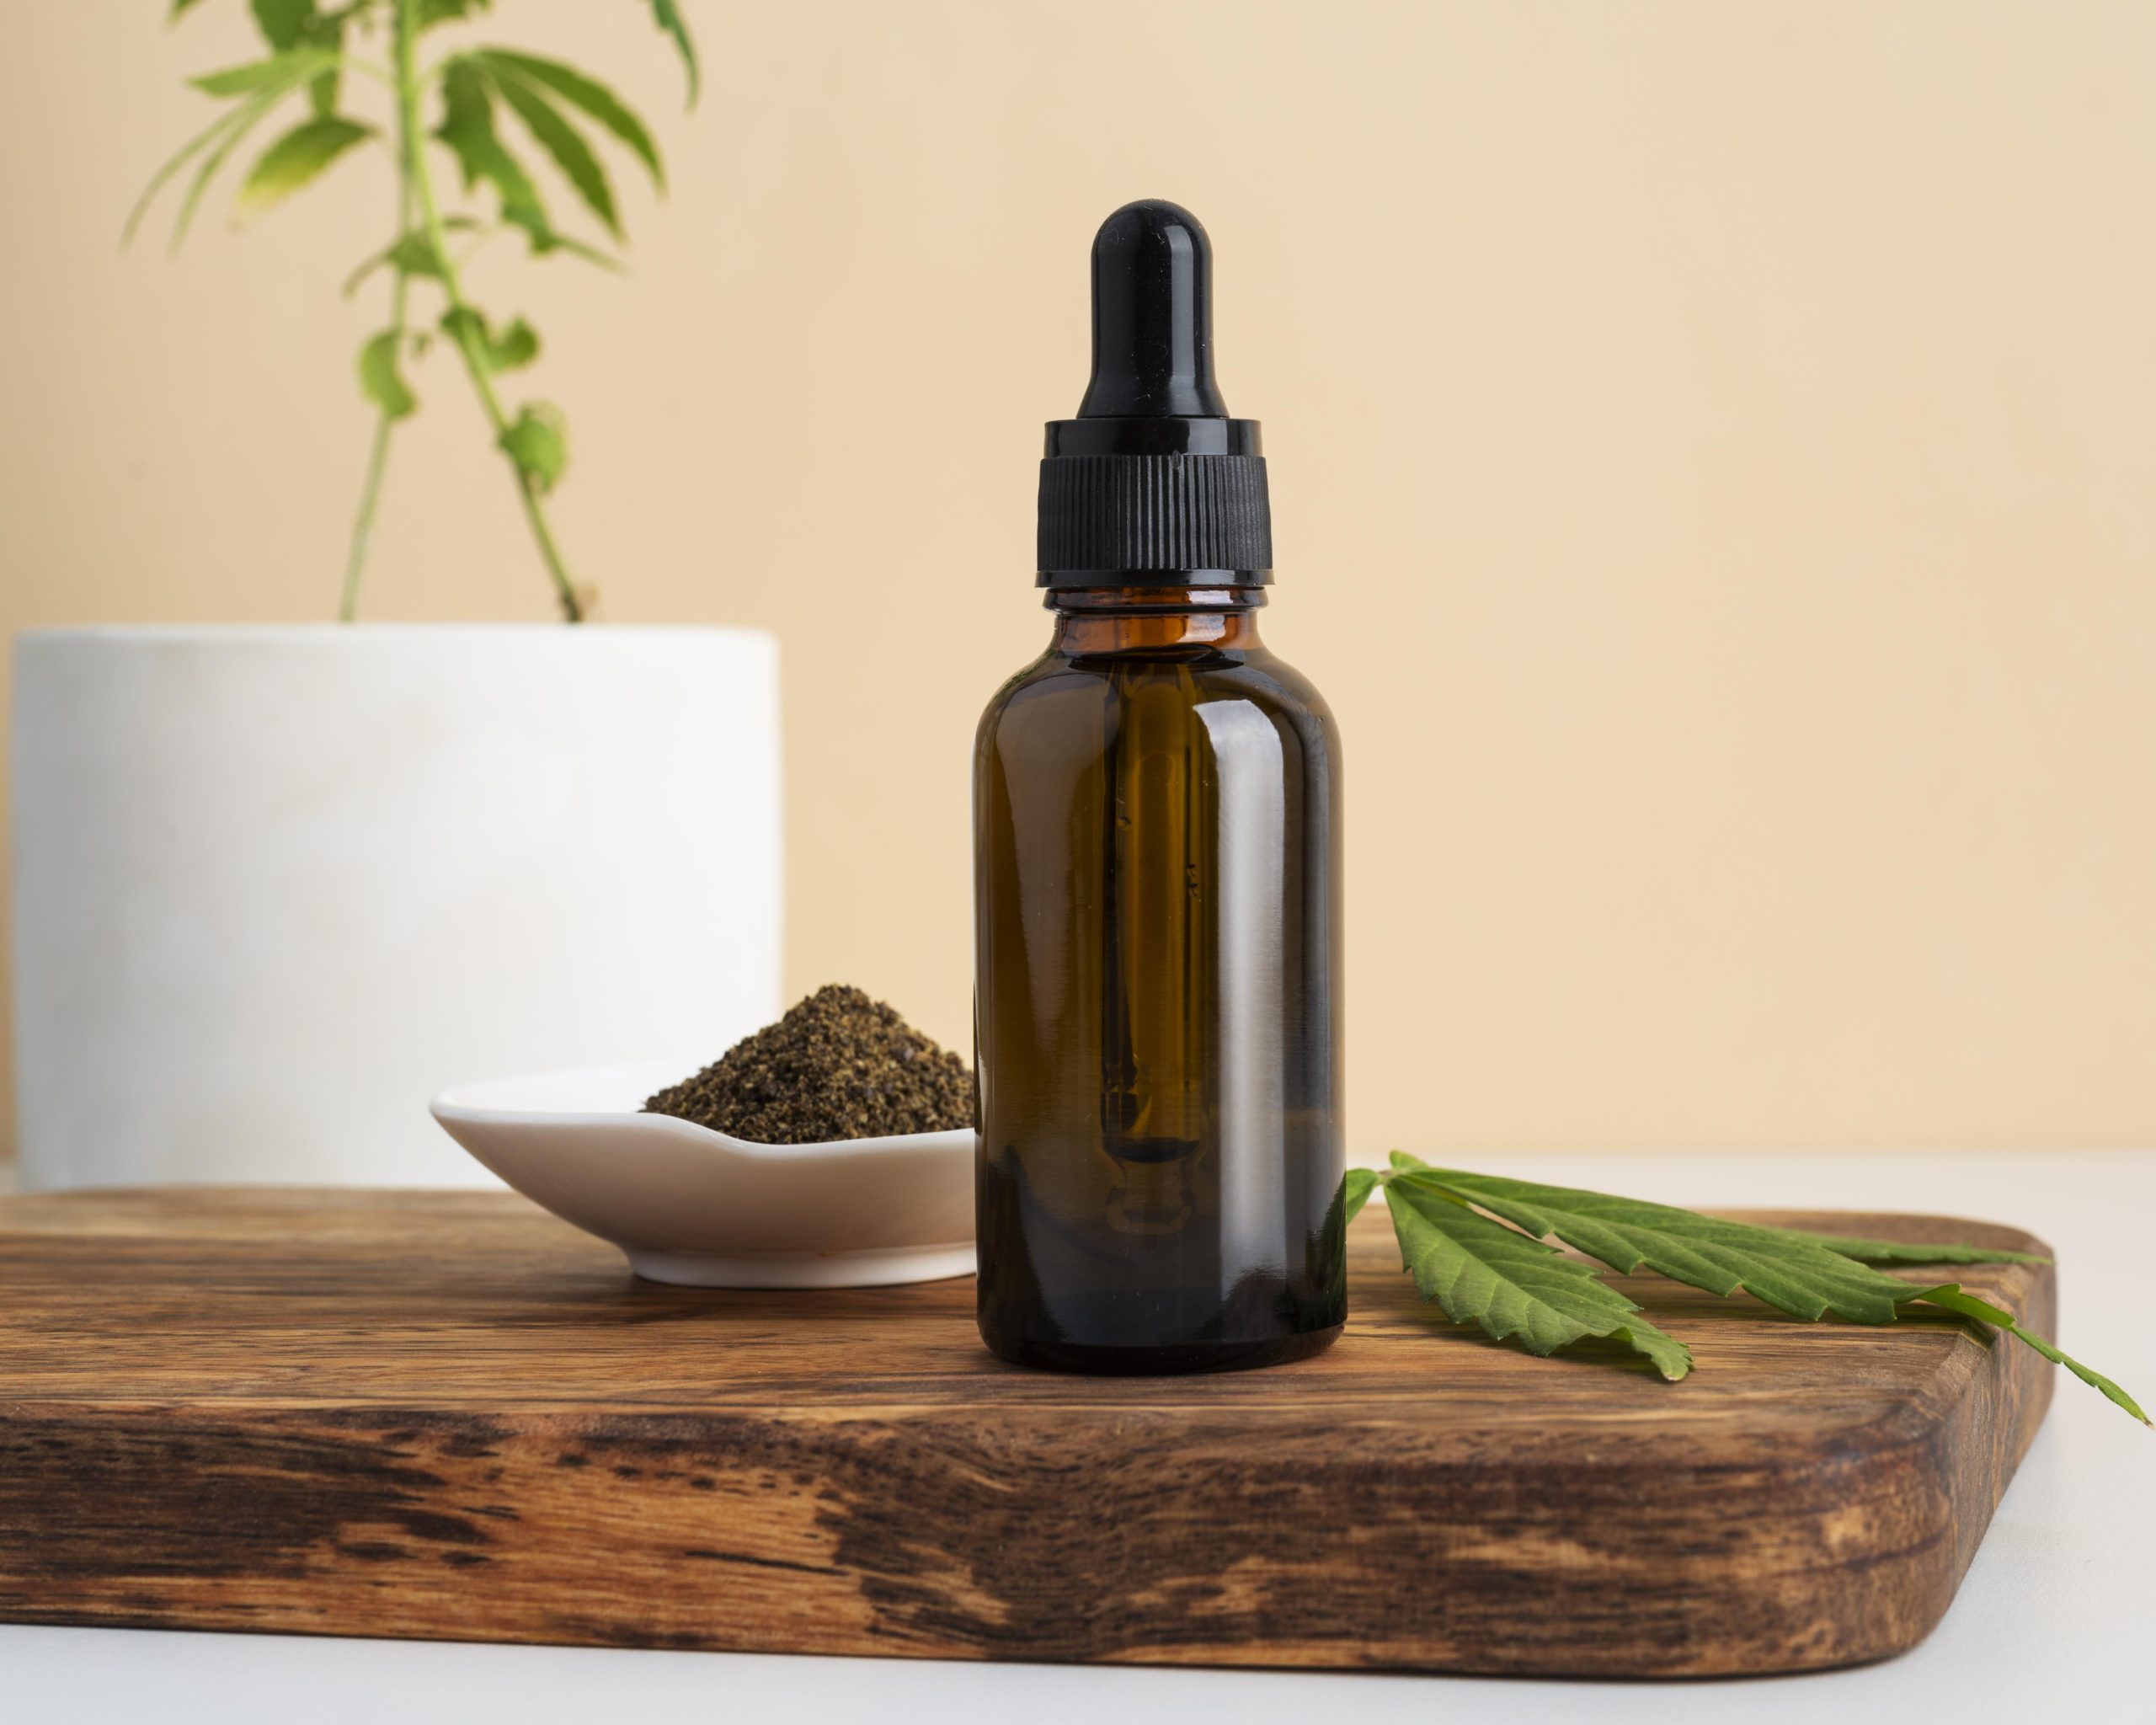 How to Use CBD Oil For Pain